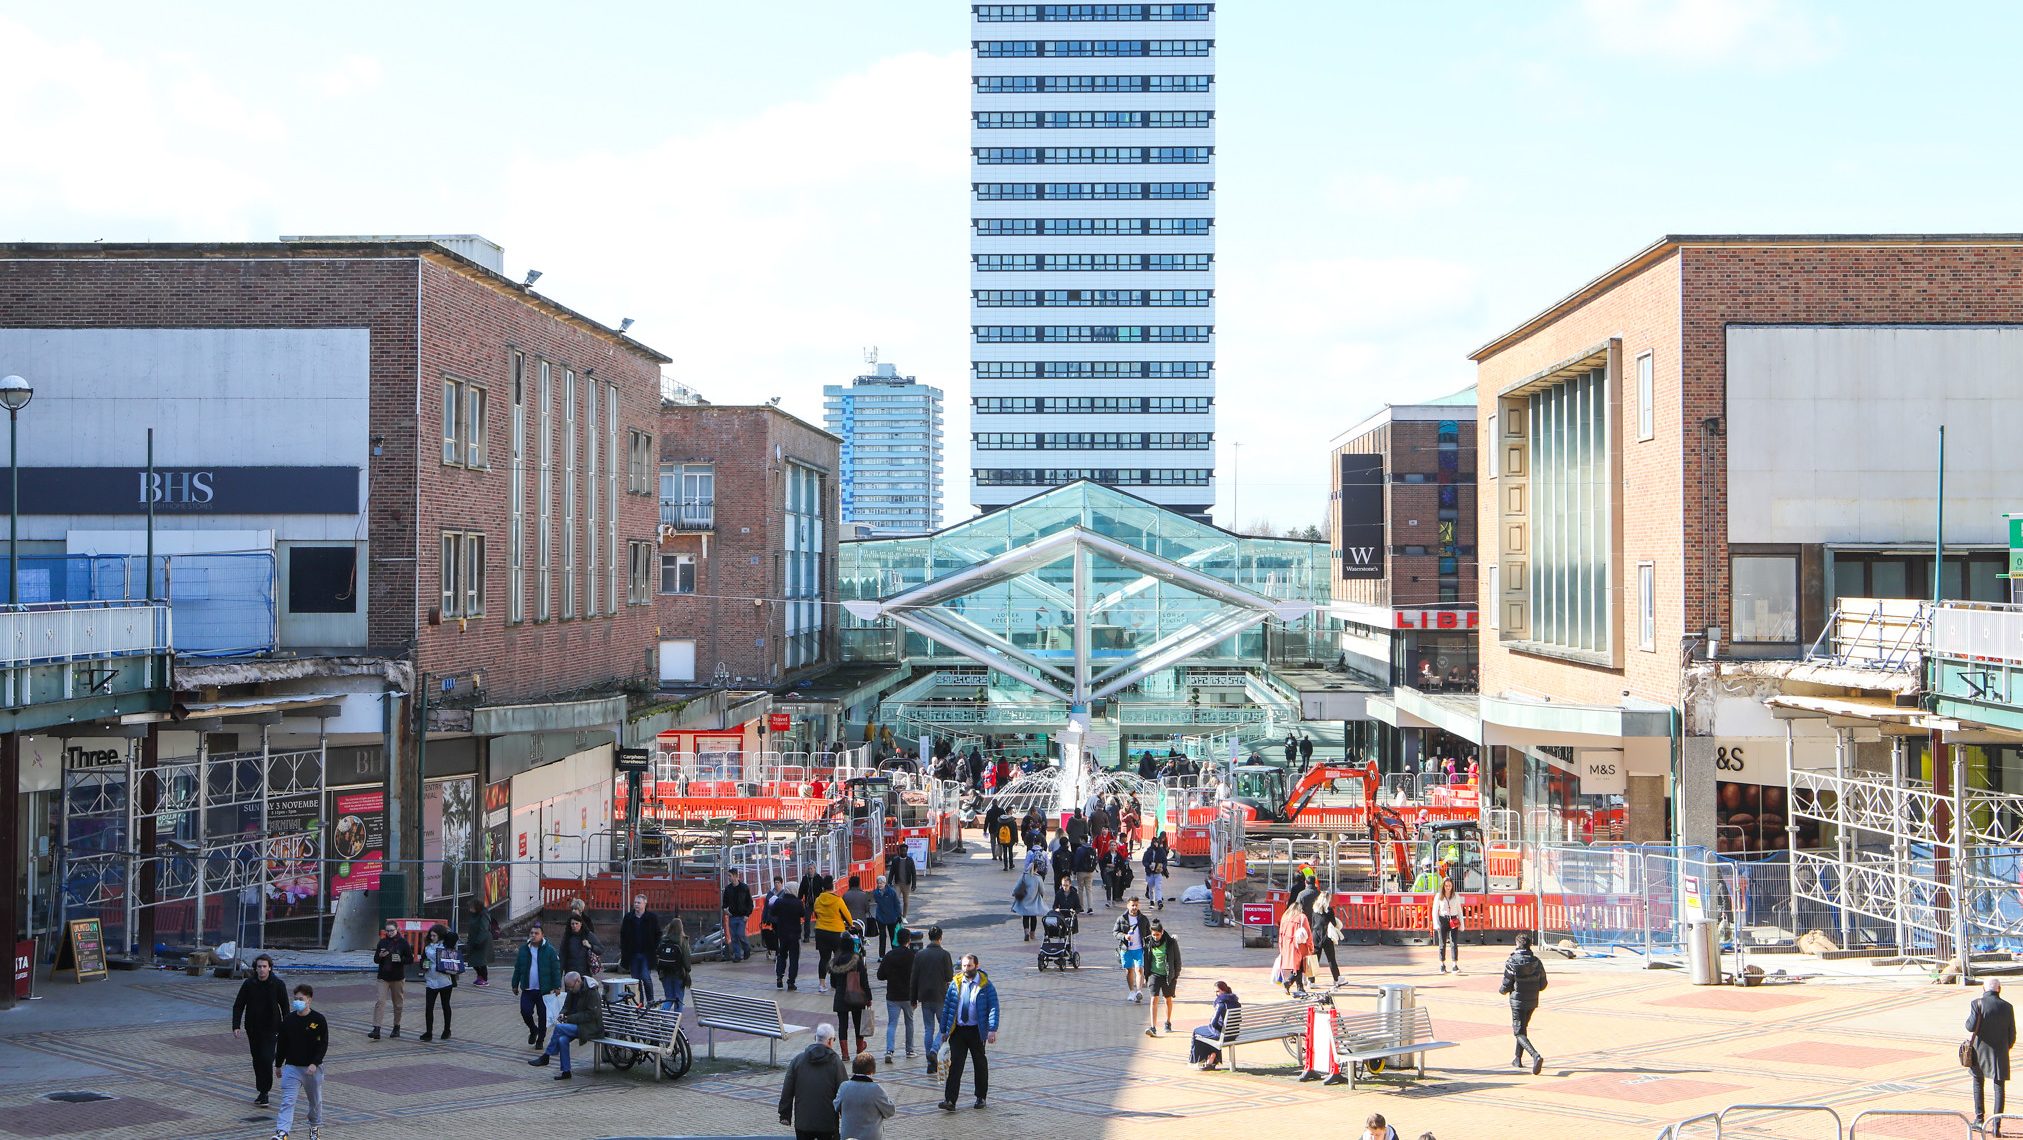 A photograph of Coventry City Centre